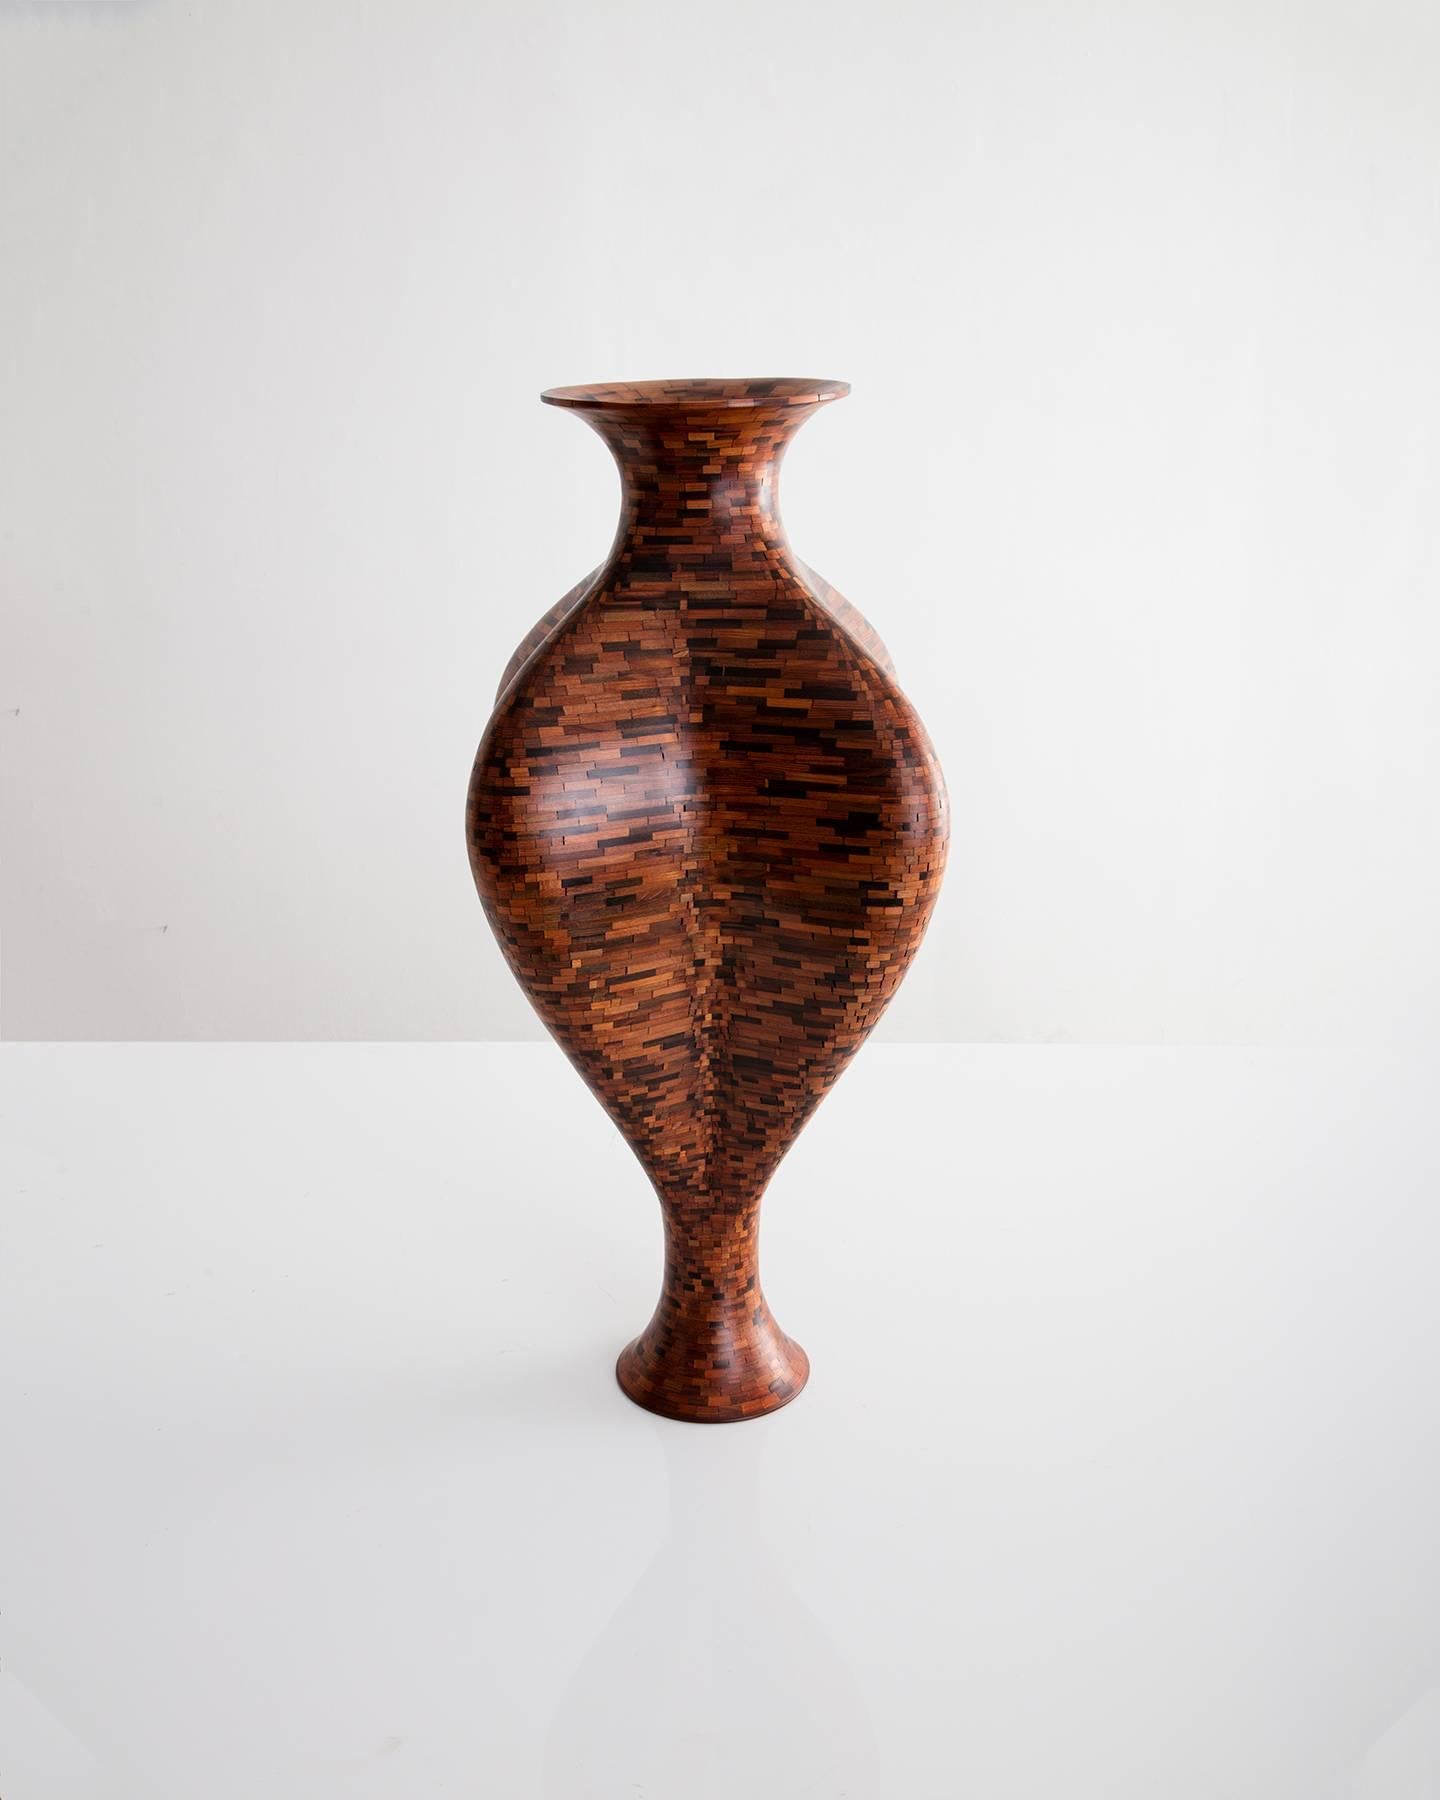 Part of Richard Haining's Stacked Collection, the wood in this vase was salvaged from a decommissioned NYC water tower. The wood's natural coloring shows off tones ranging from pink and deep reds to almost black in color. There is no stain involved.